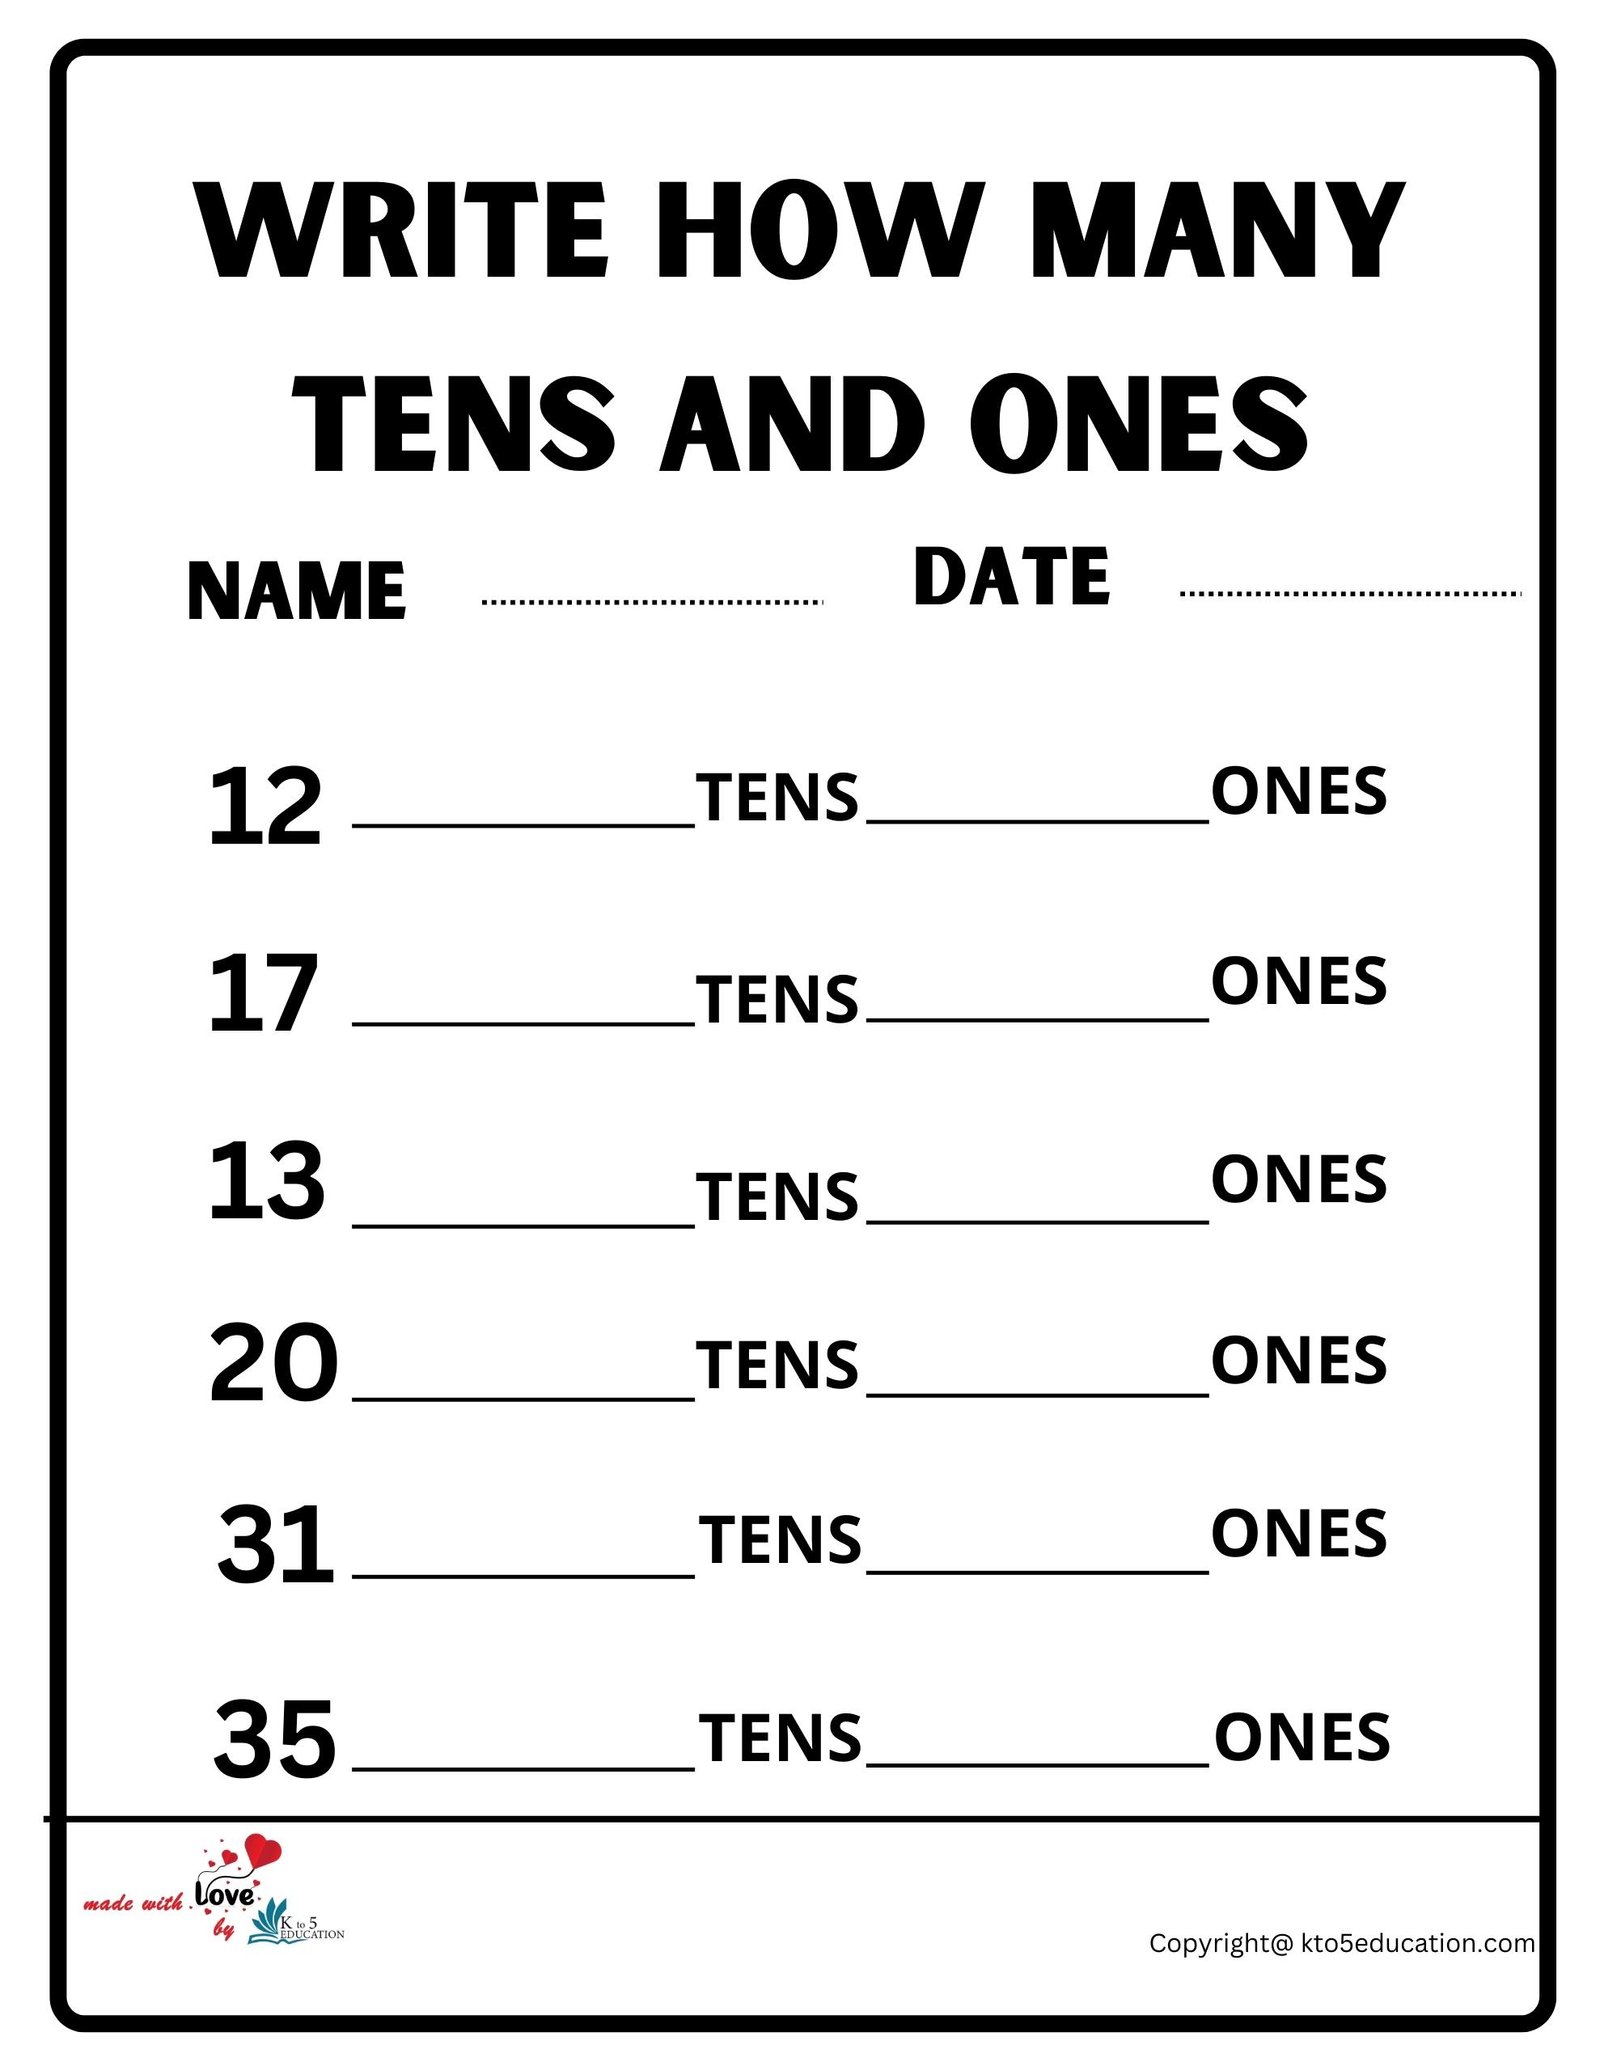 Write How Many Tens And Ones